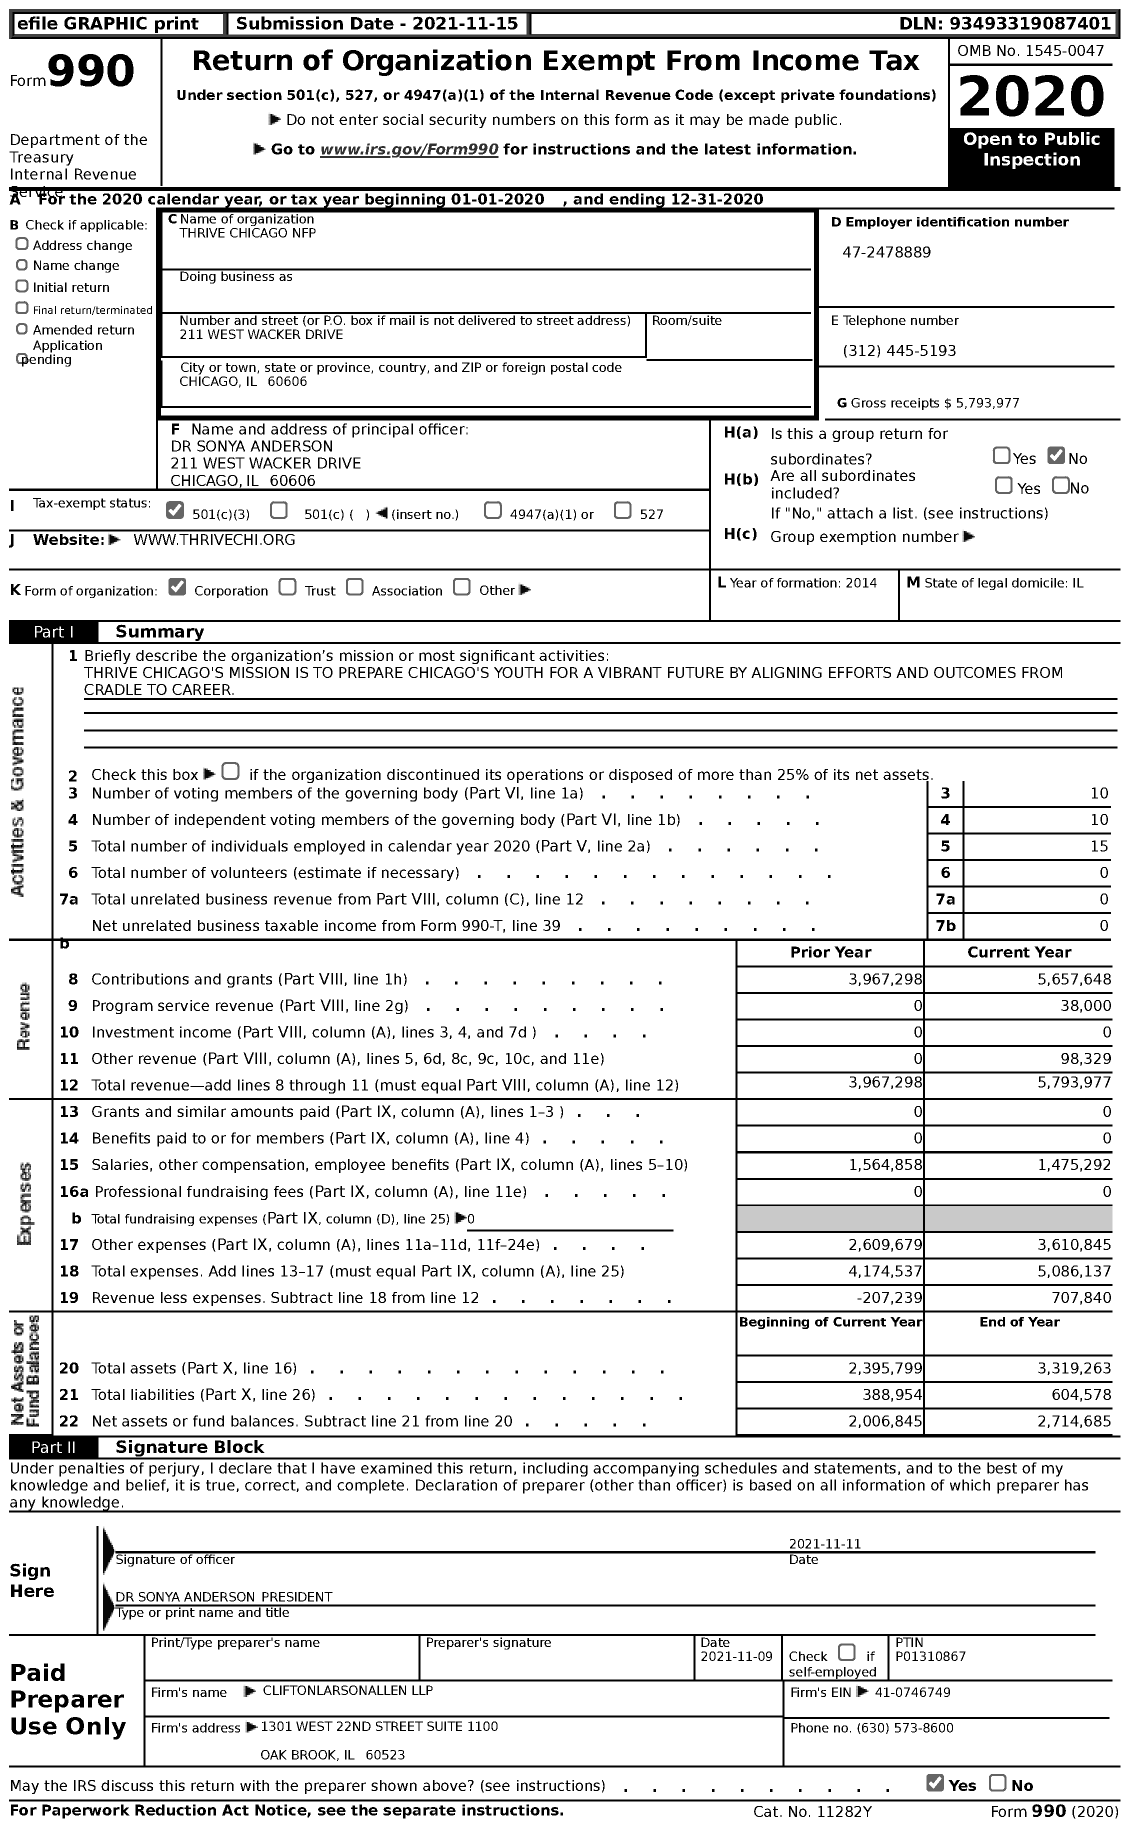 Image of first page of 2020 Form 990 for Thrive Chicago NFP